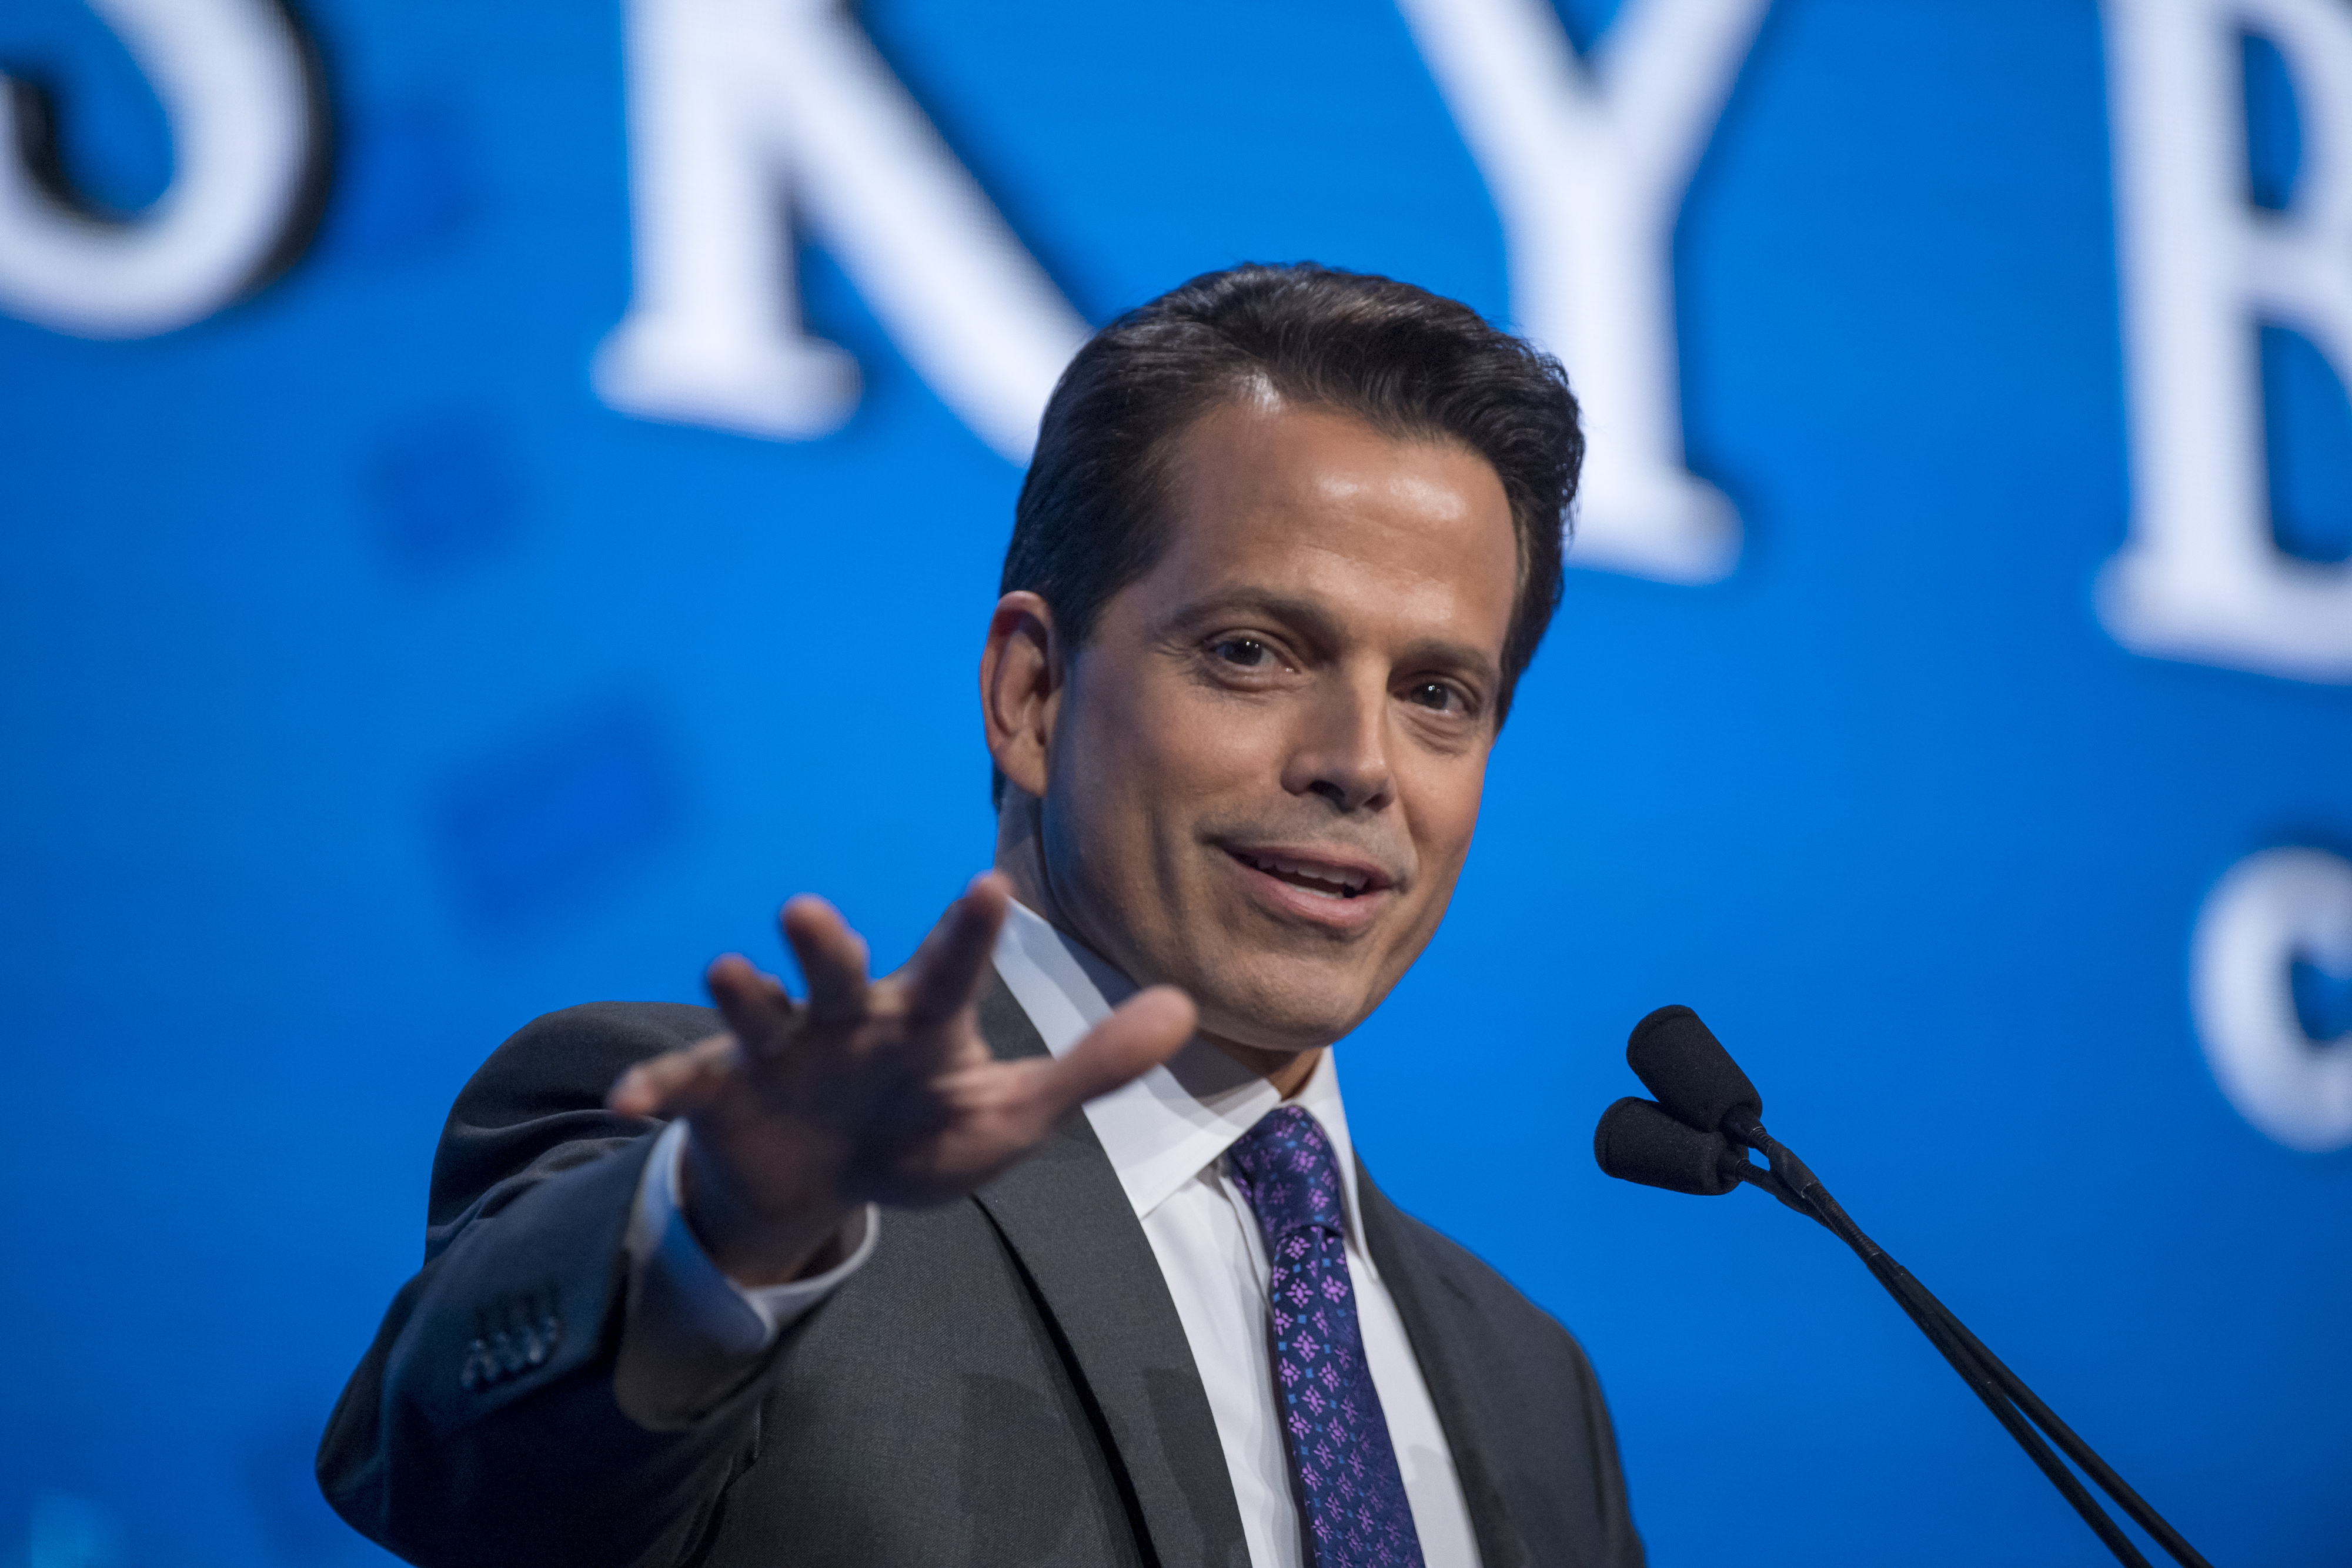 Anthony Scaramucci, founder of SkyBridge Capital LLC, speaks during the Skybridge Alternatives (SALT) conference in Las Vegas, Nevada, U.S., on Wednesday, May 17, 2017. (David Paul Morris&mdash;Bloomberg/Getty Images)